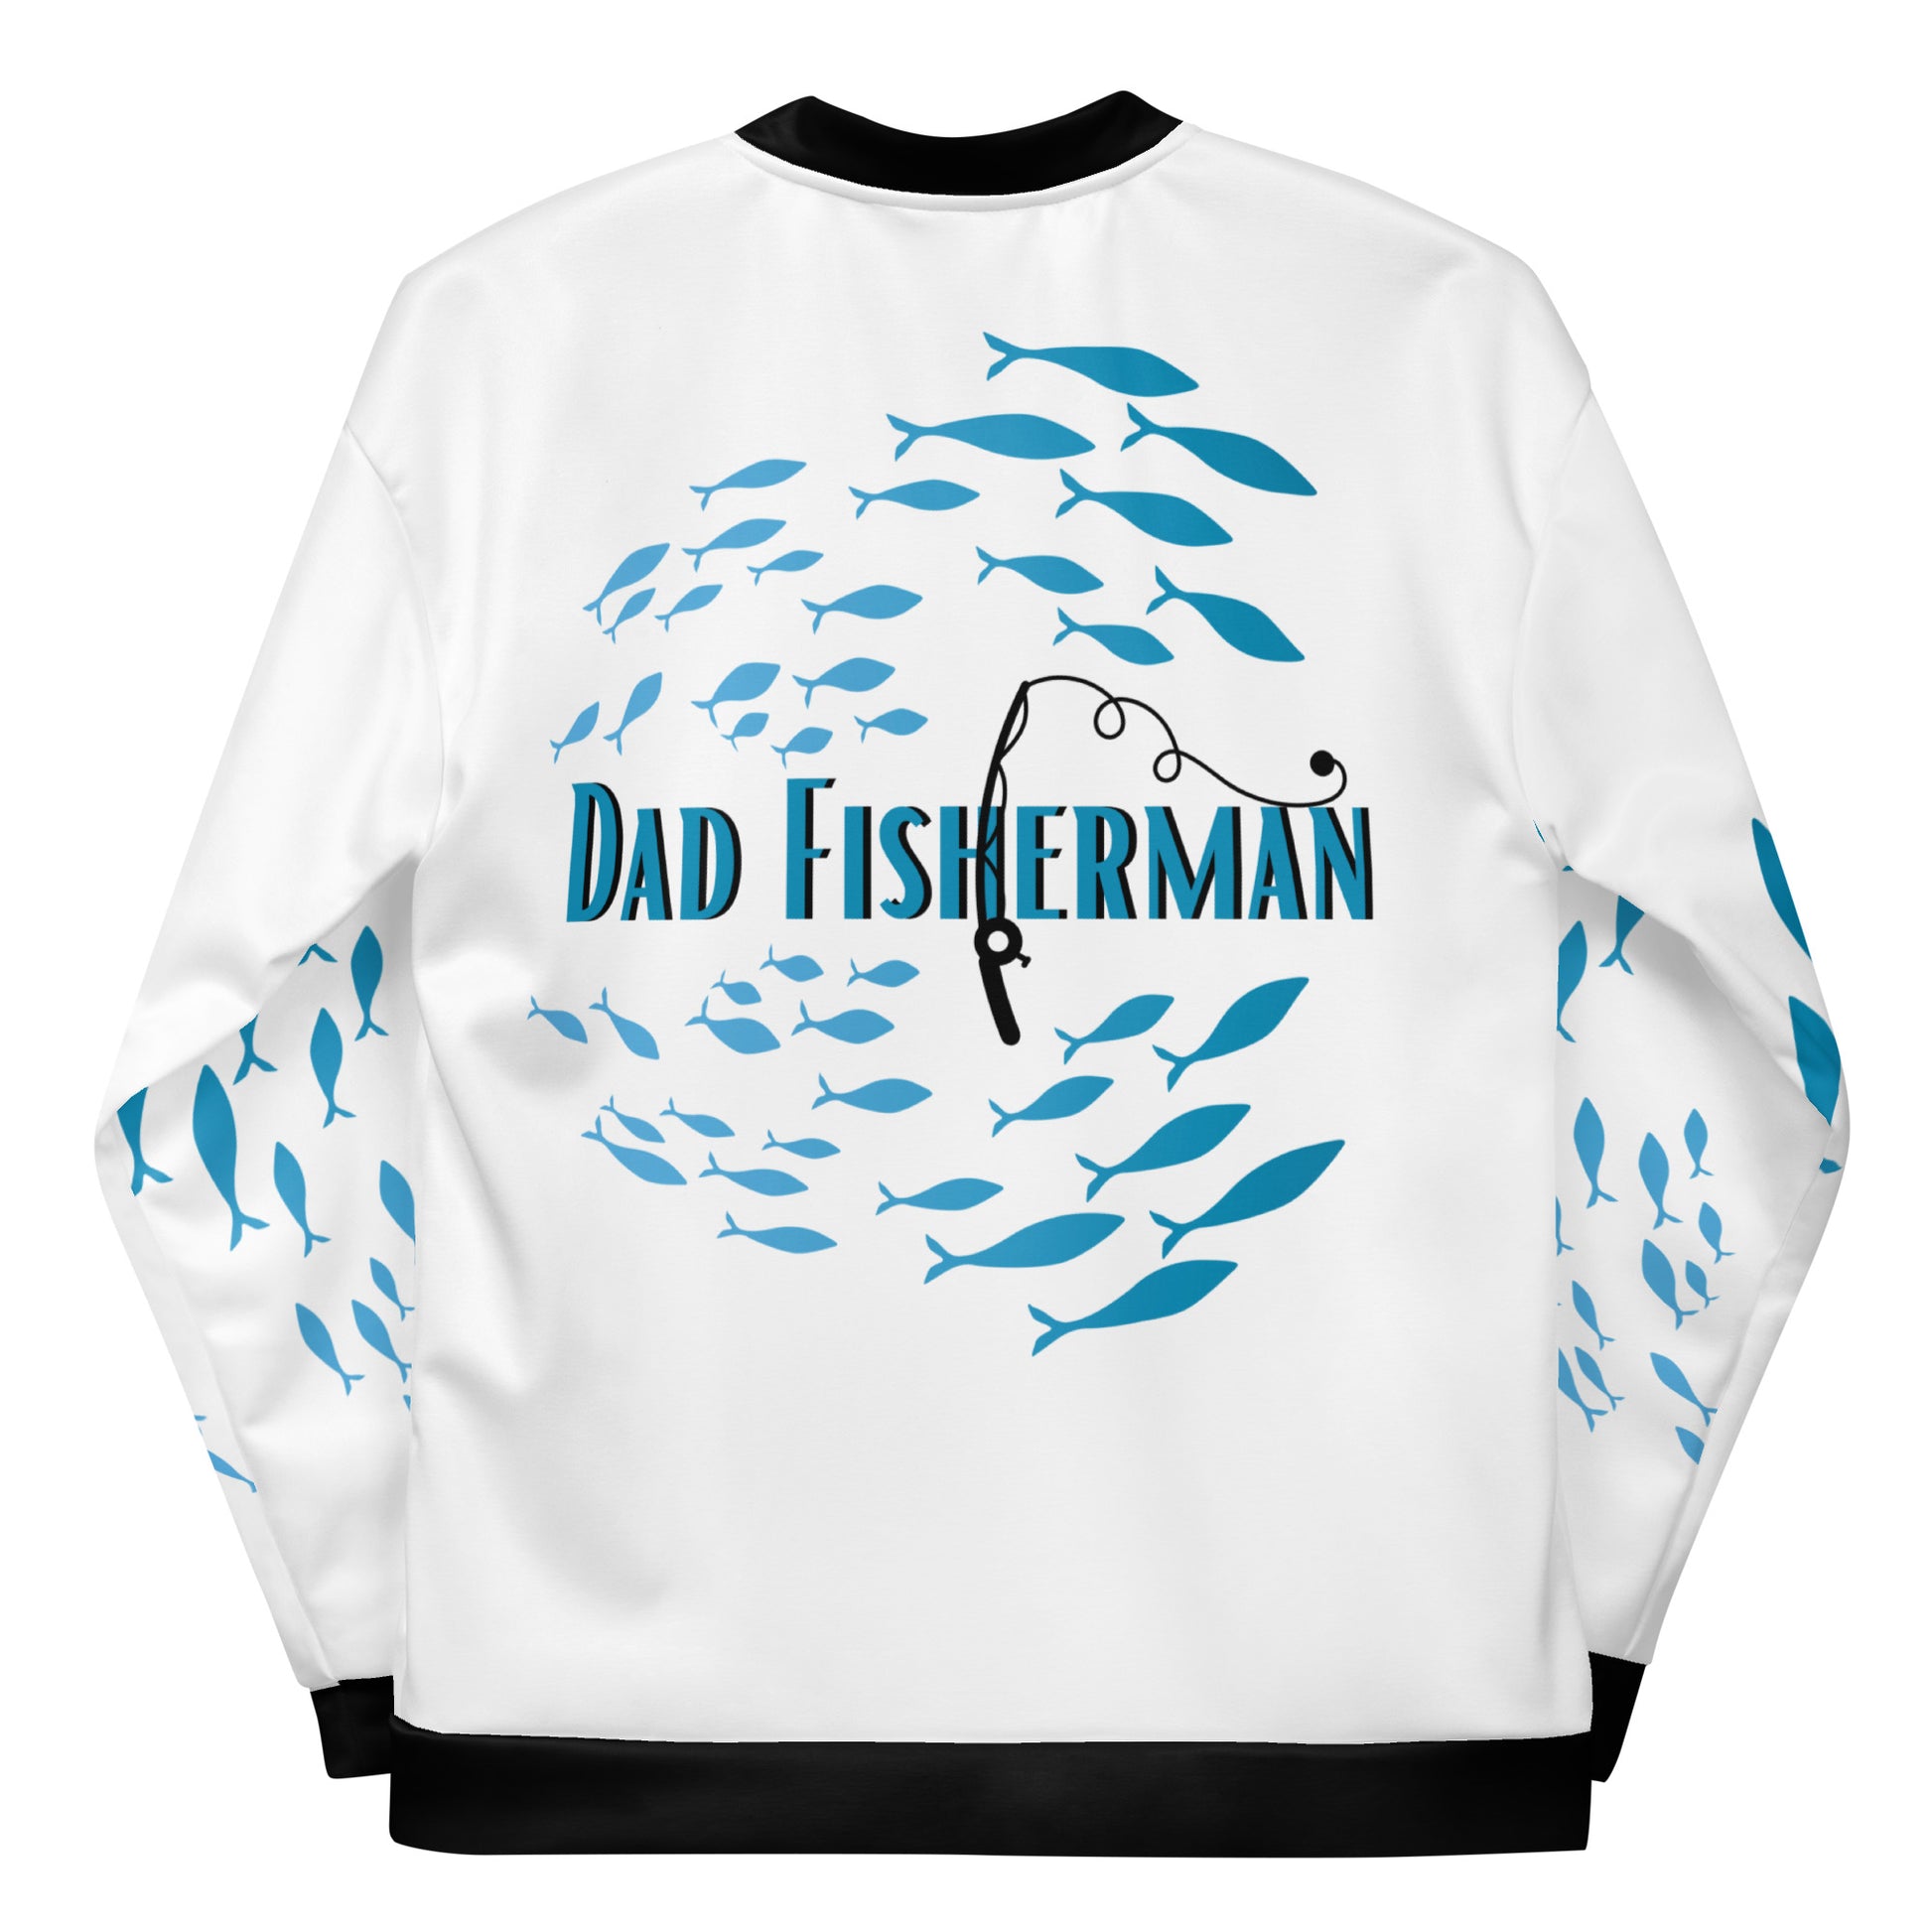 Father's Day - Fishermen Jacket. Gift for Dad that Fish, Fisherman Father's Day Gift